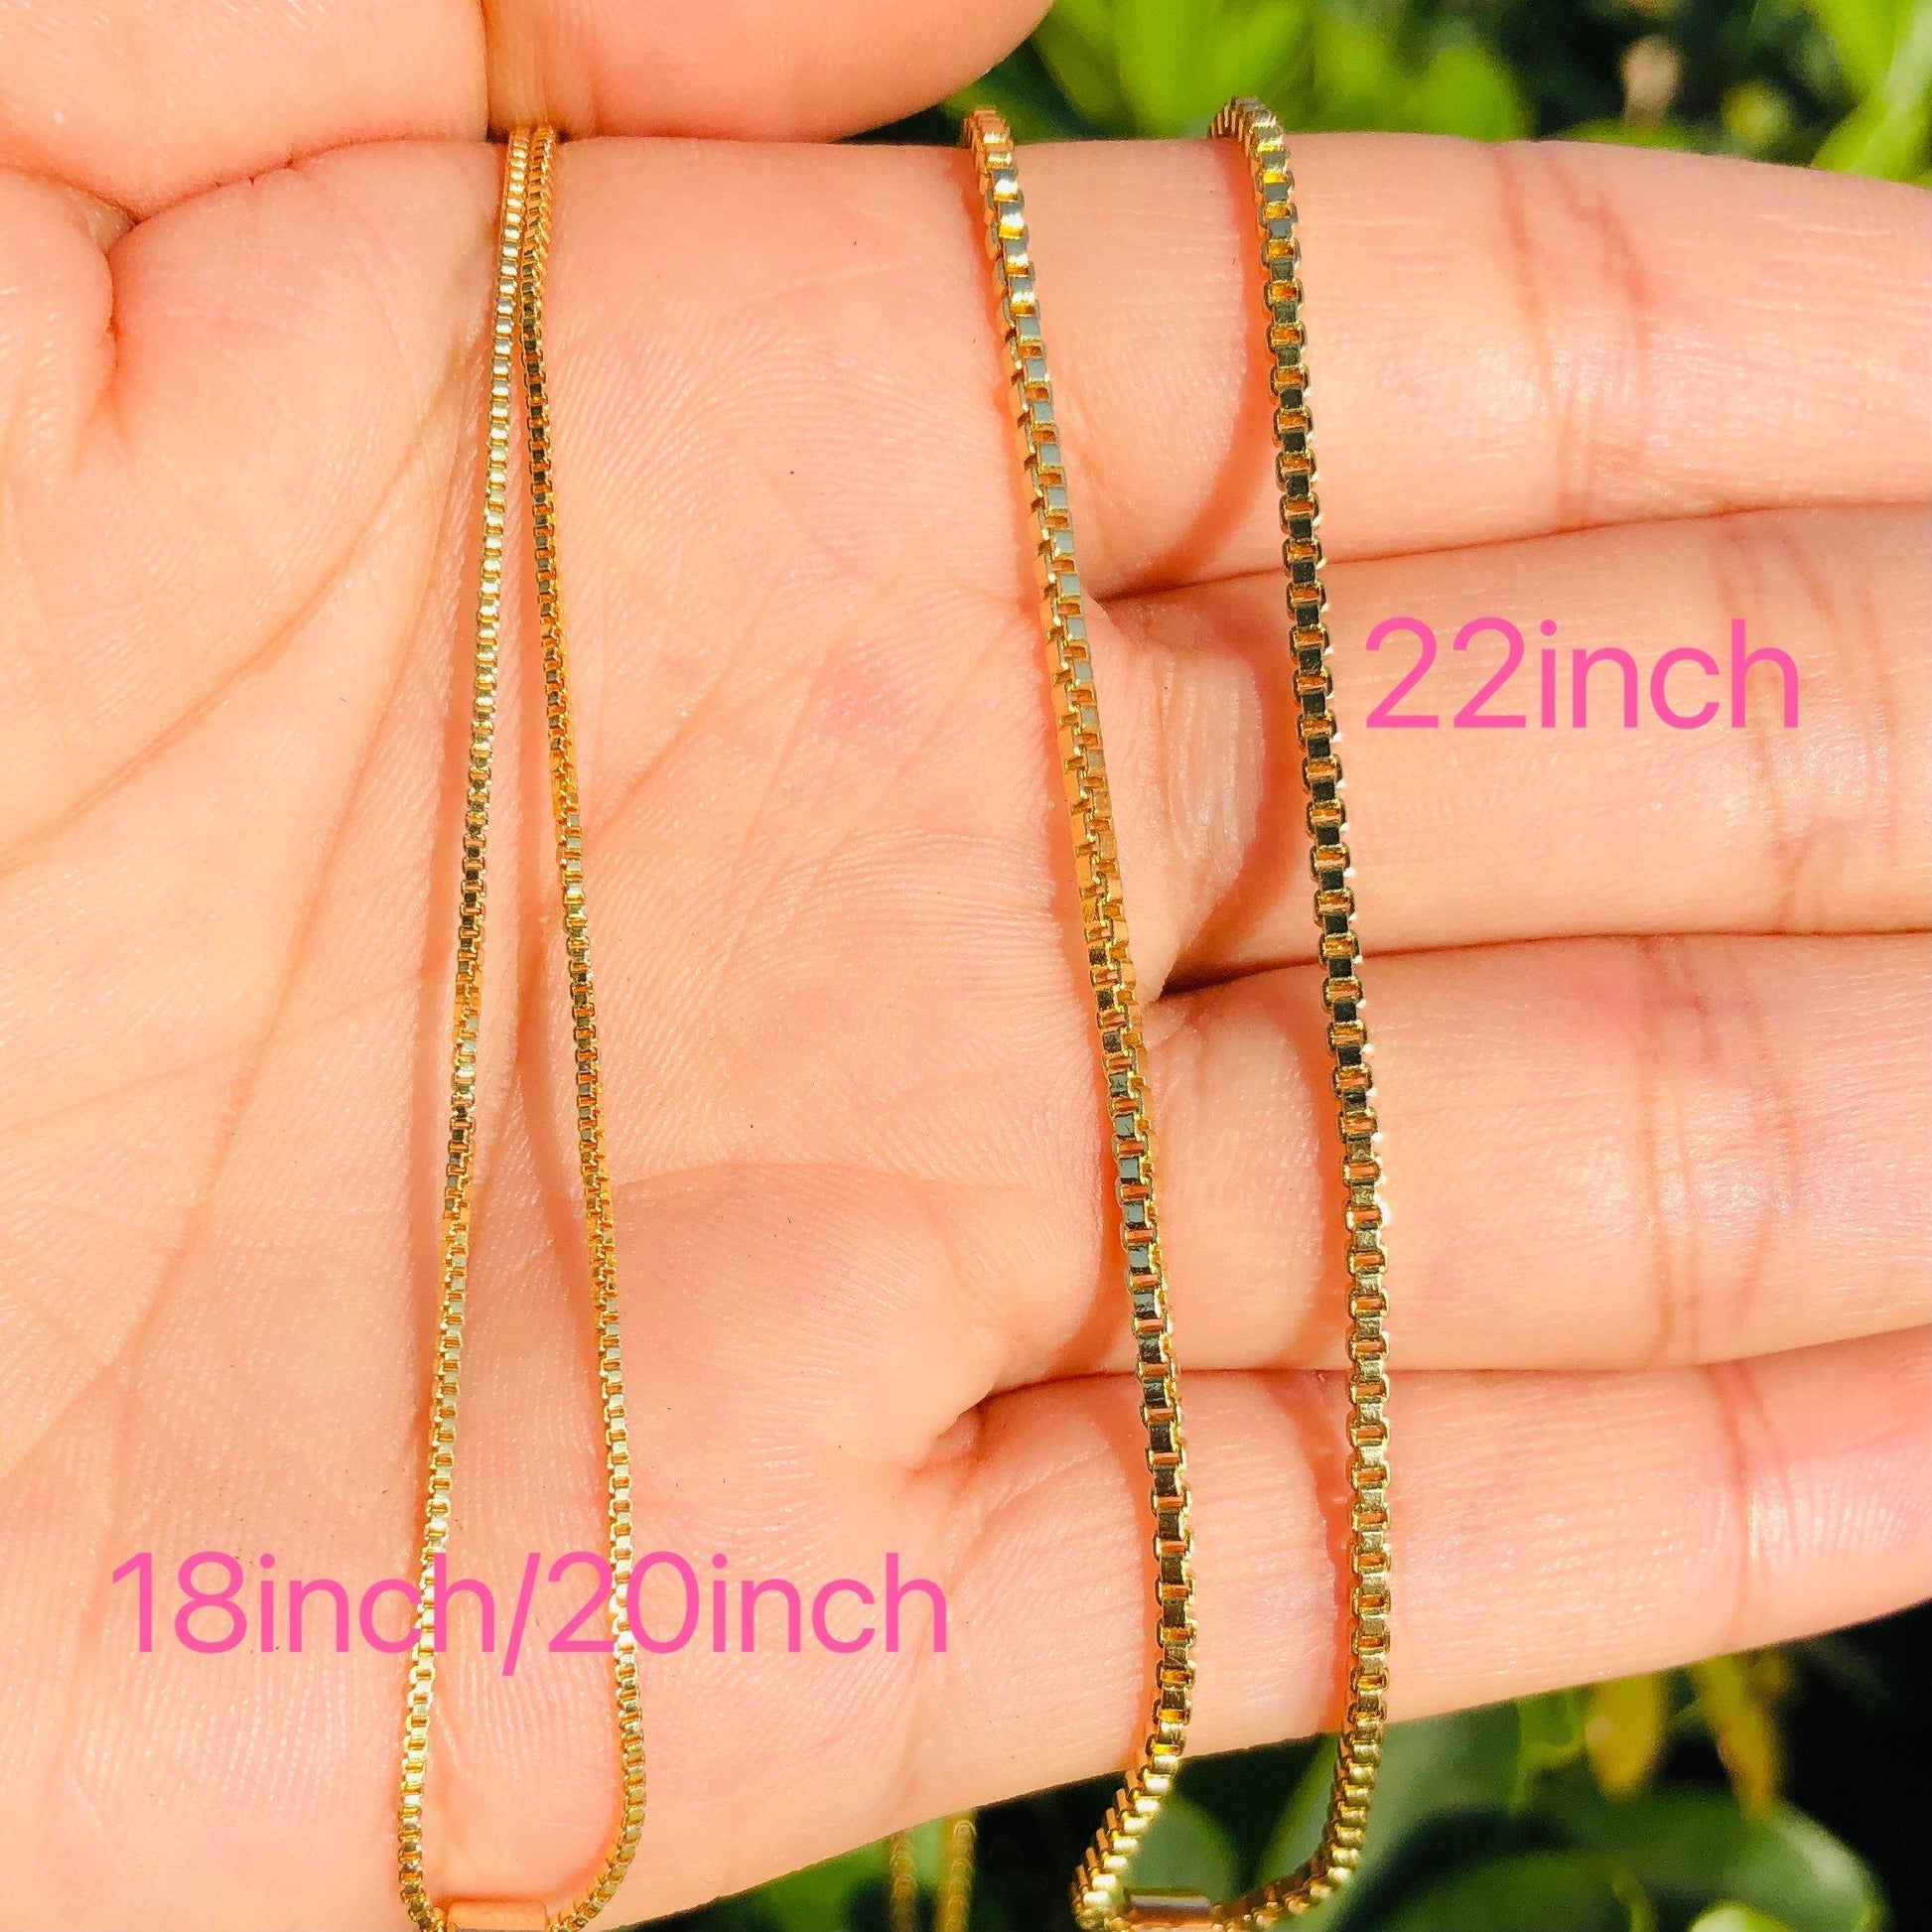 5pcs/lot 55*33mm CZ Paved Cross Necklace Necklaces Charms Beads Beyond